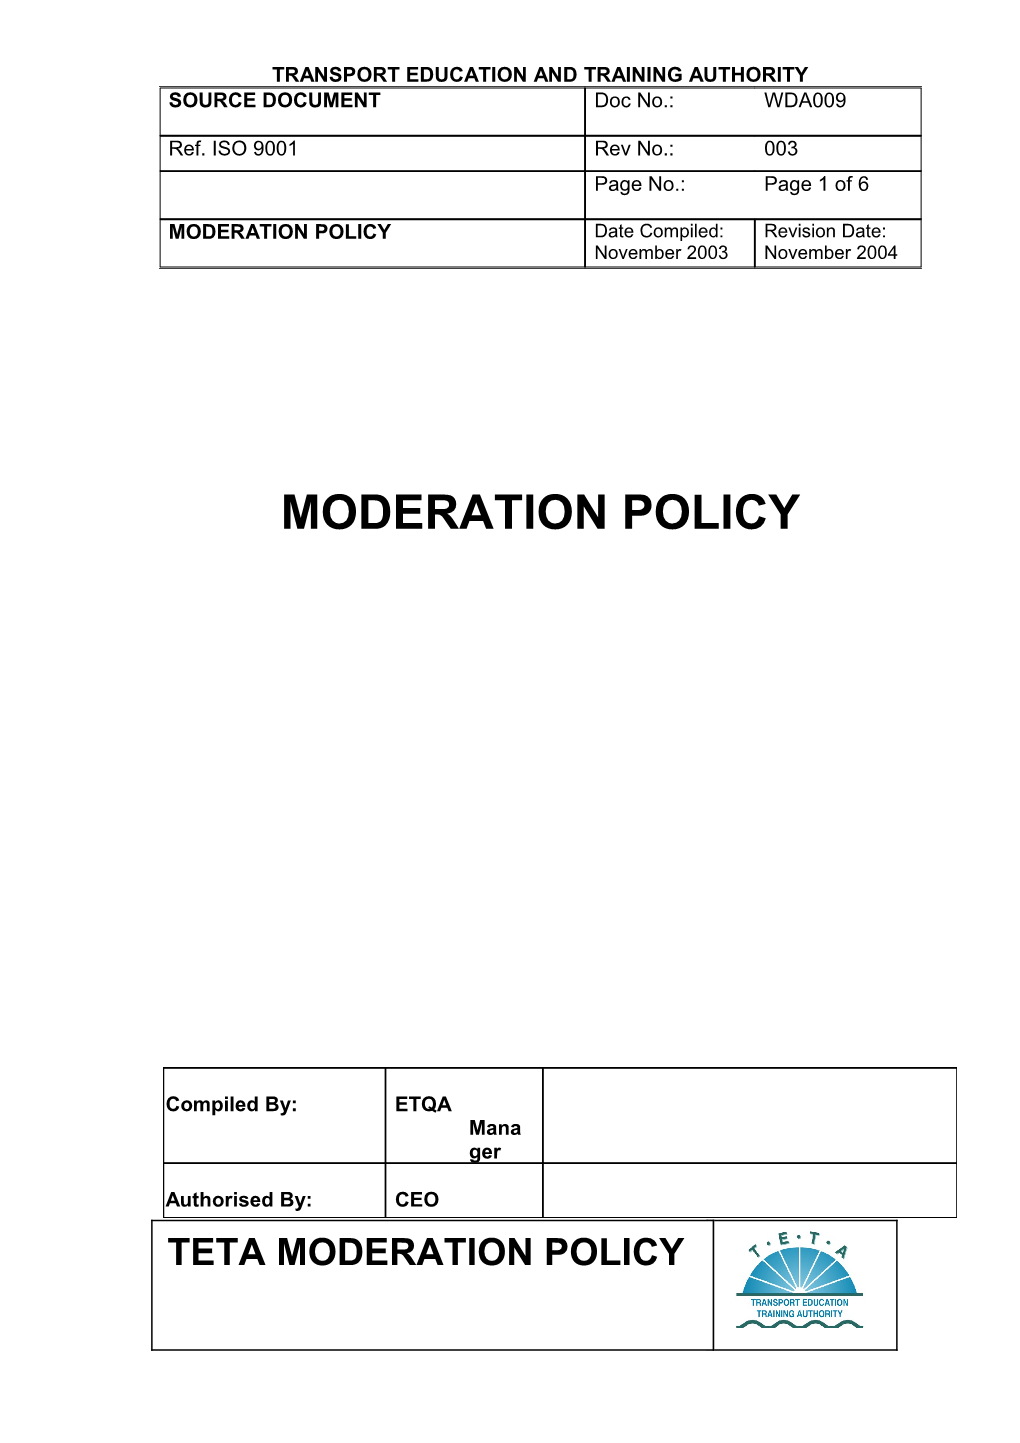 Moderation Policy